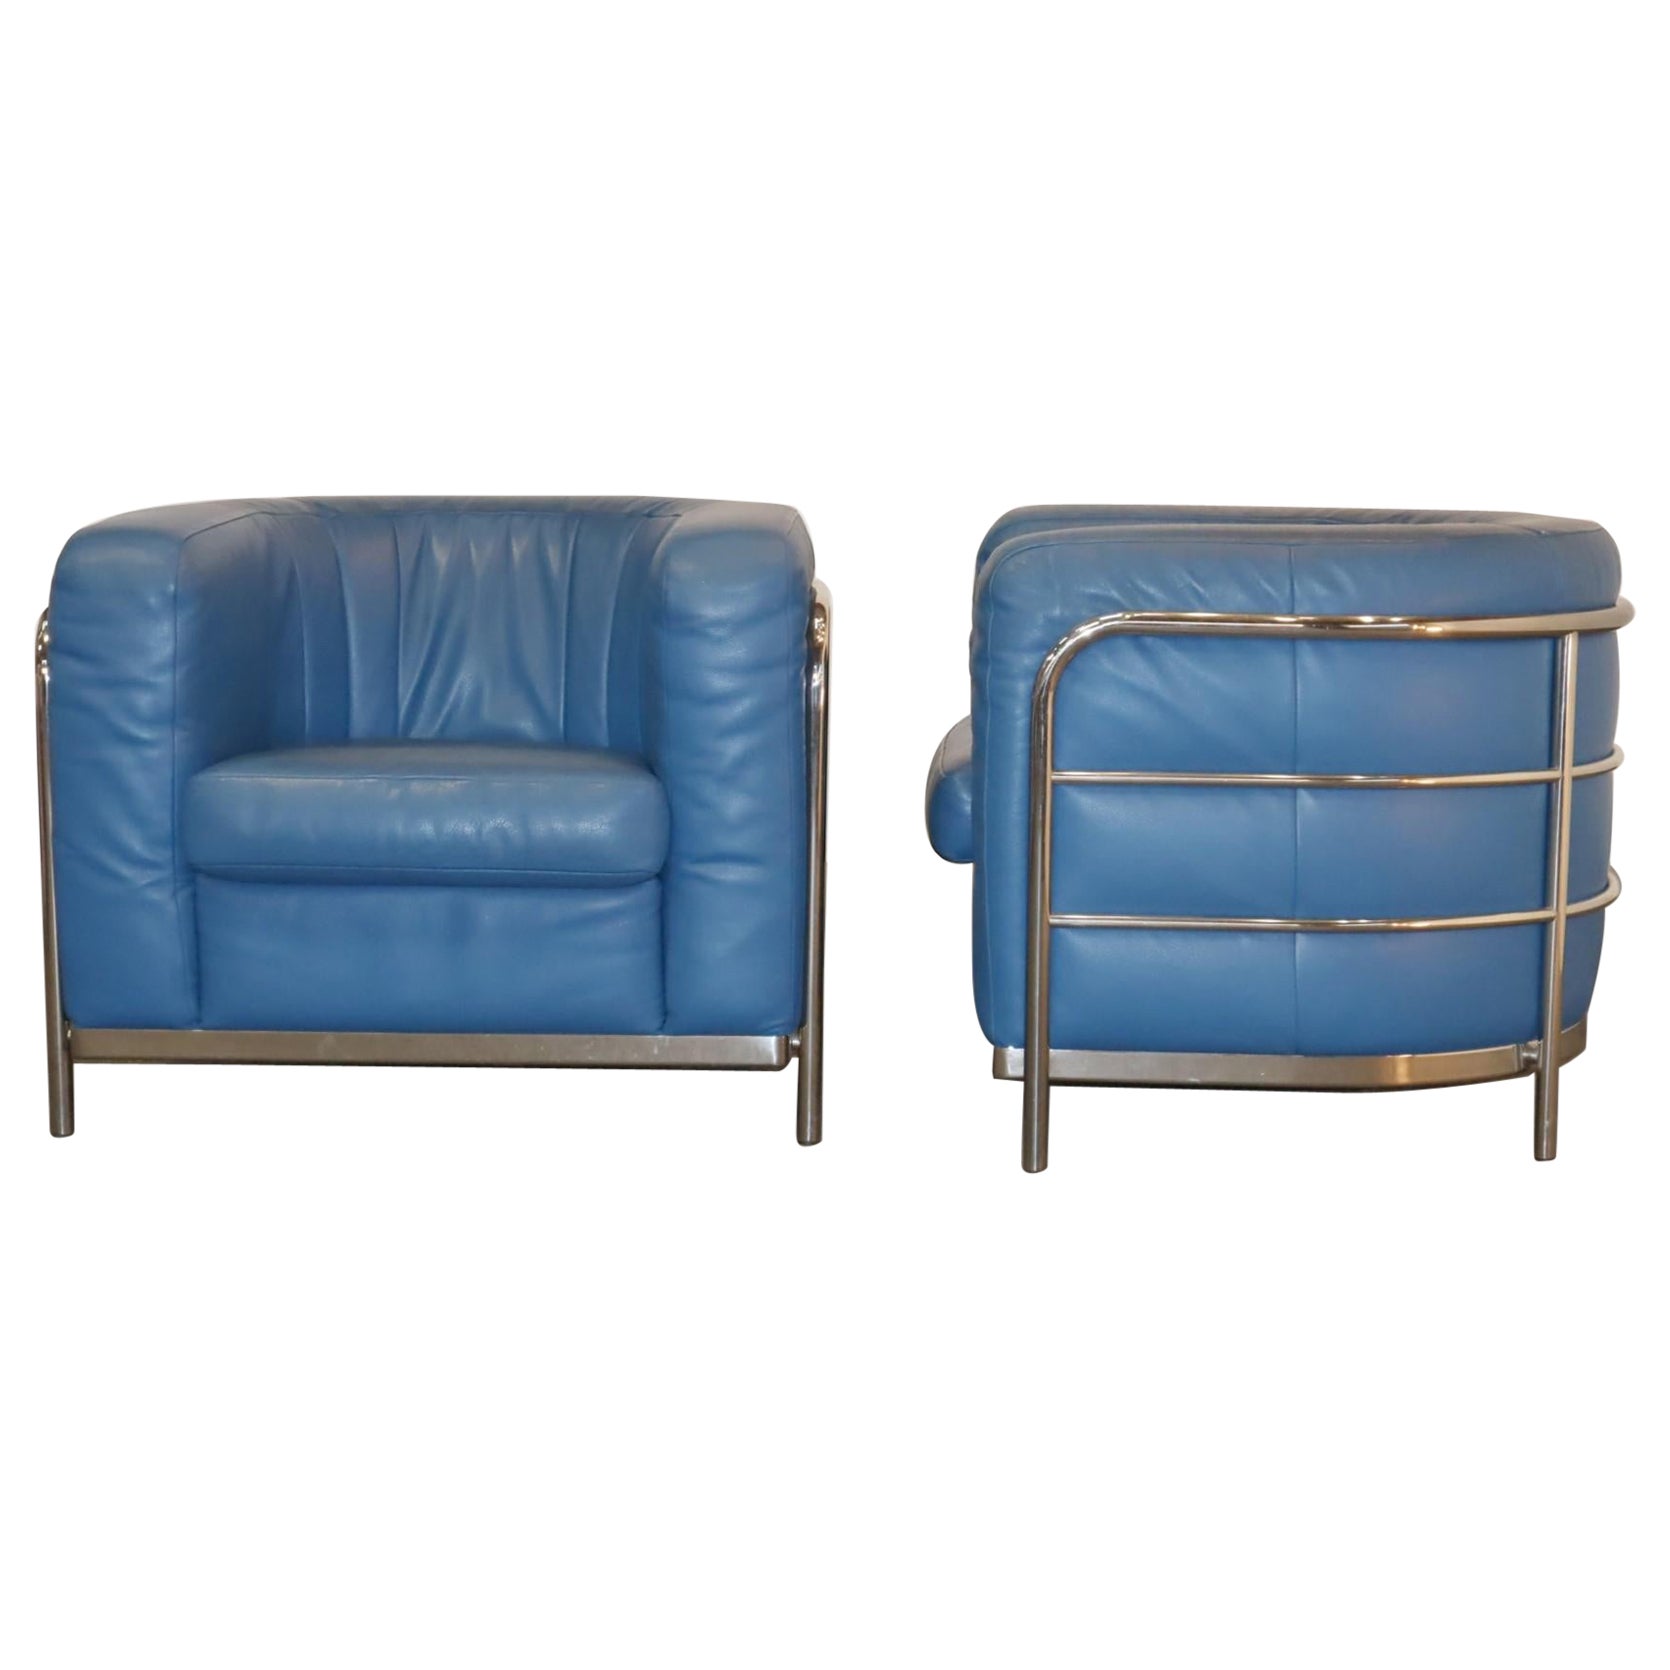 Zanotta Onda Pair of Armchairs in Blue Leather by De Pas, D'urbino For Sale